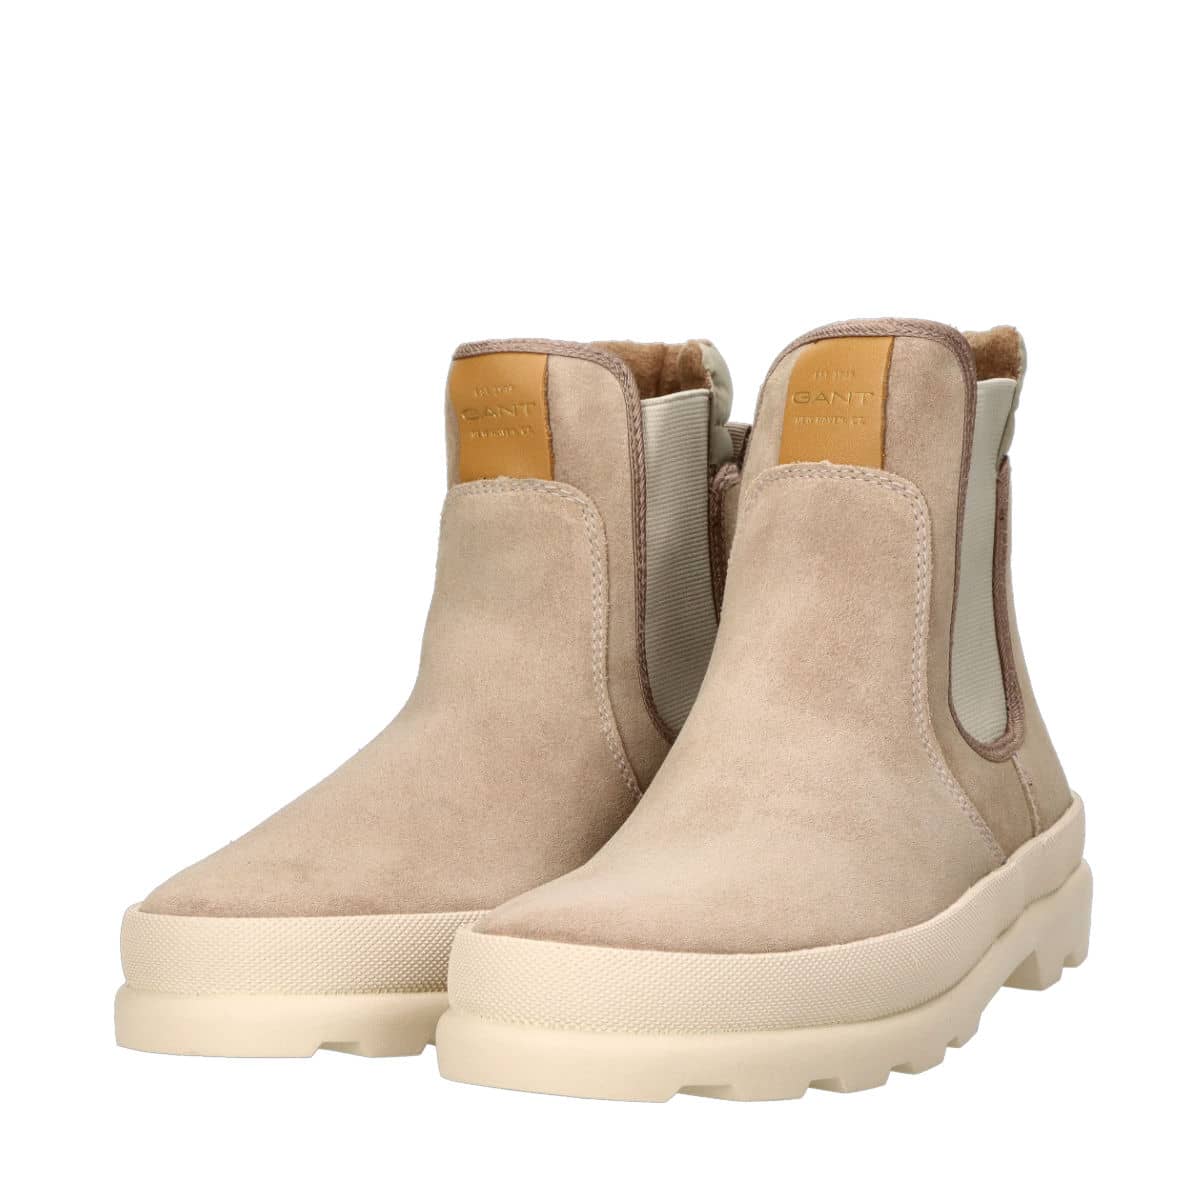 Gant women's suede ankle boots -